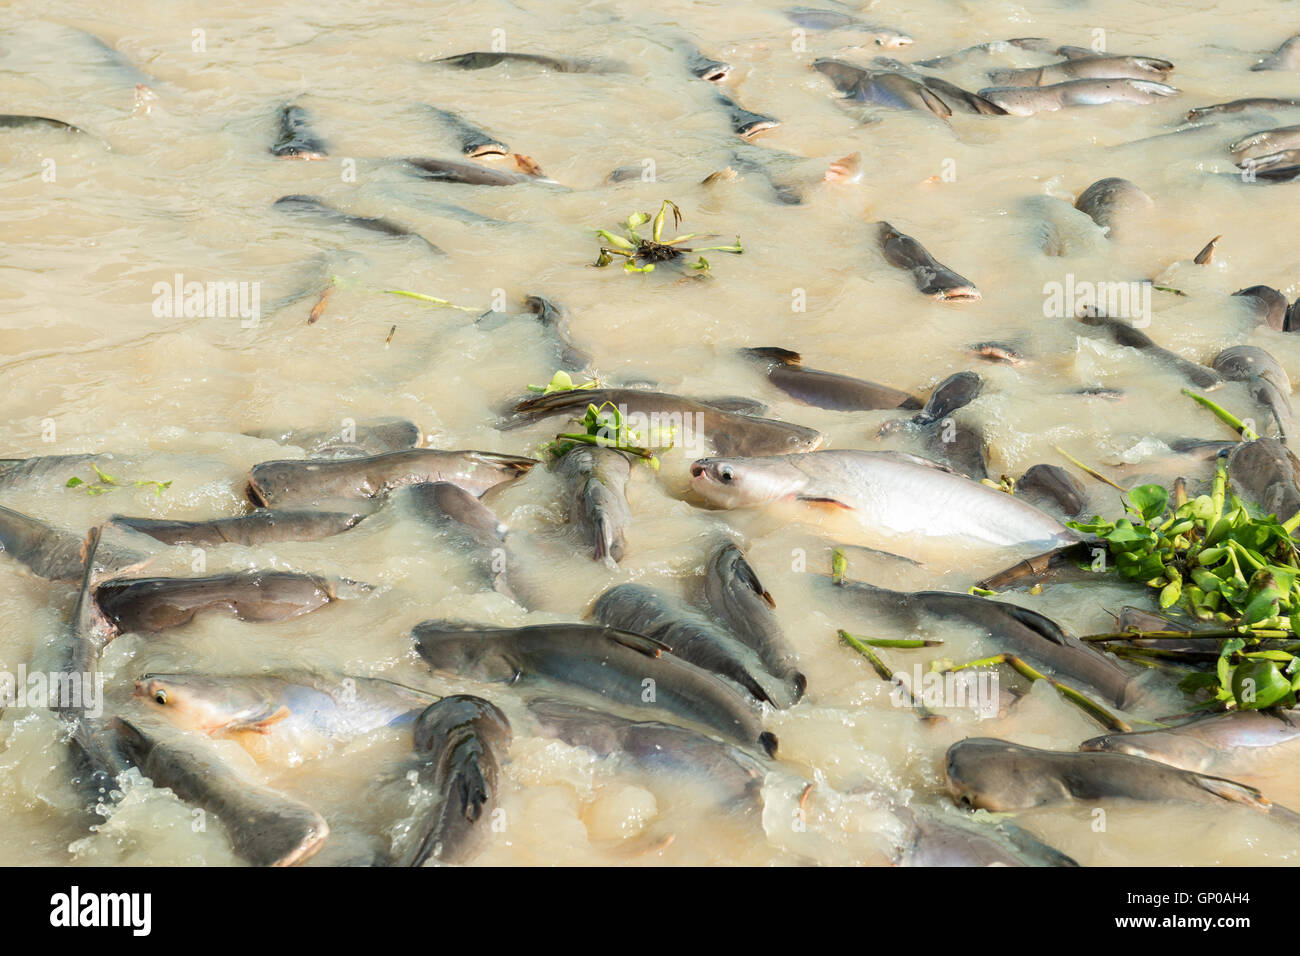 fish in the canal, pangasius, catfish, striped snakehead fish. Stock Photo